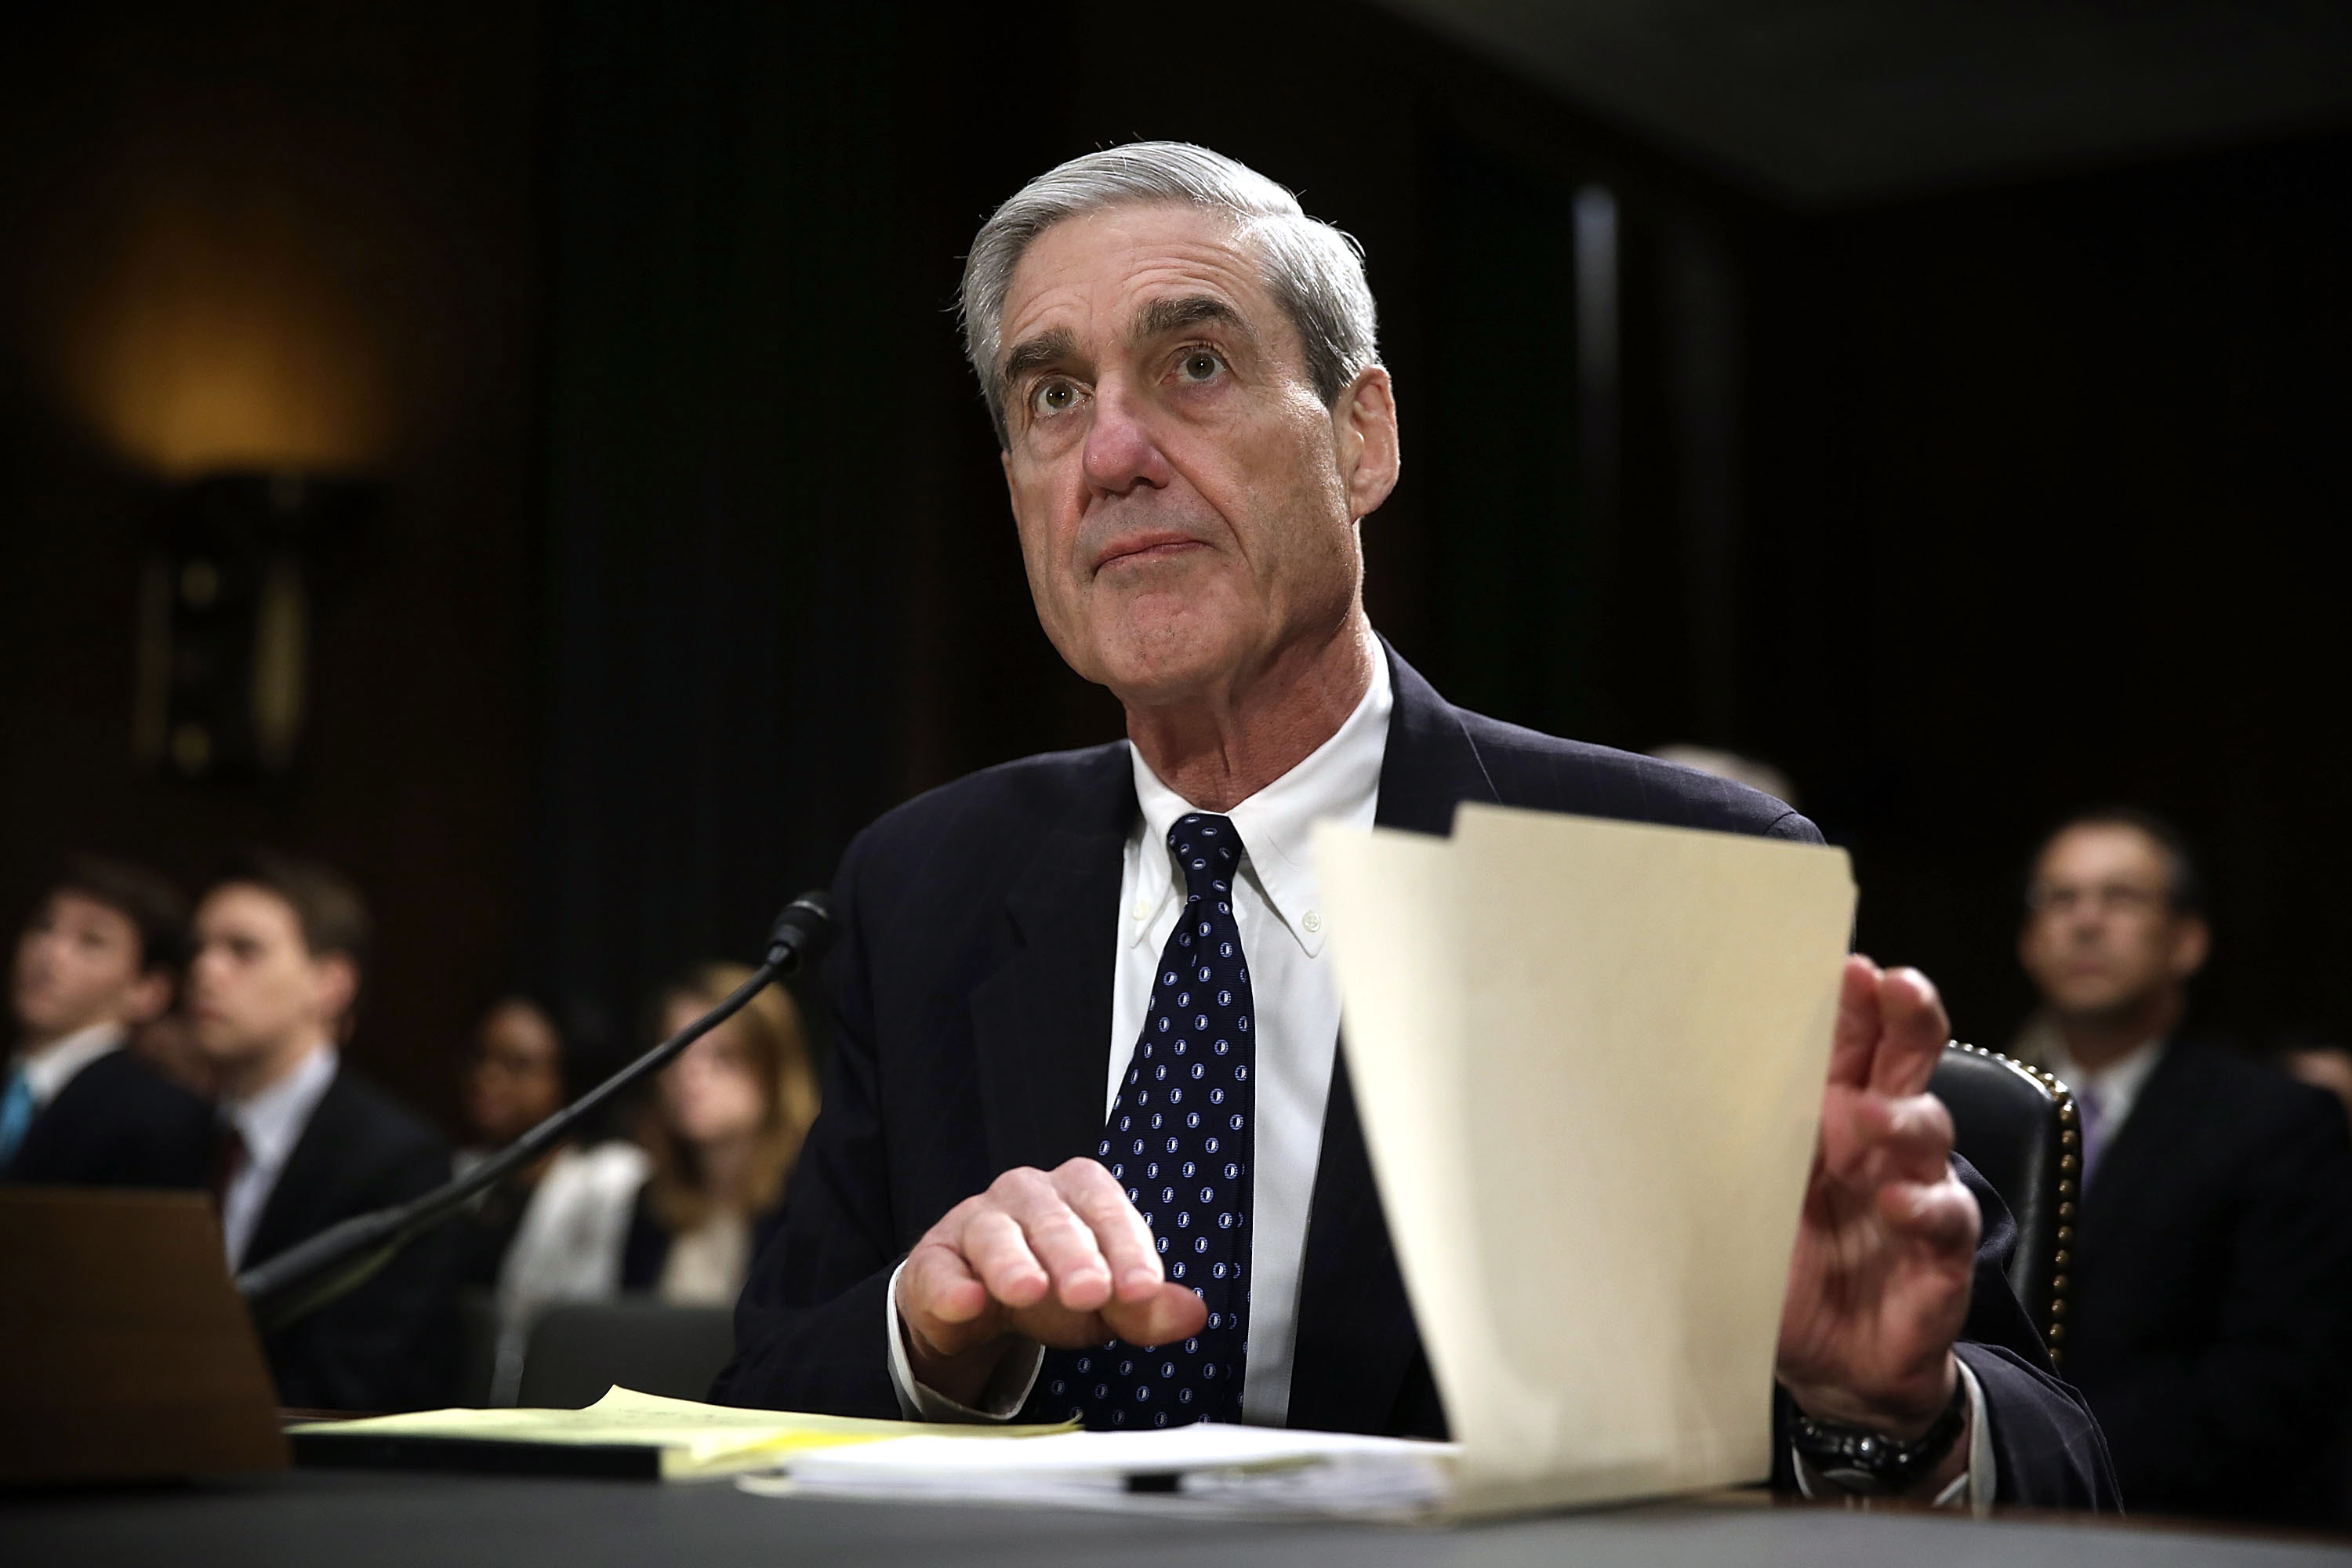 Robert Mueller waits for the beginning of a hearing before the Senate Judiciary Committee on June 19, 2013 in Washington, DC. (Alex Wong&mdash;Getty Images)